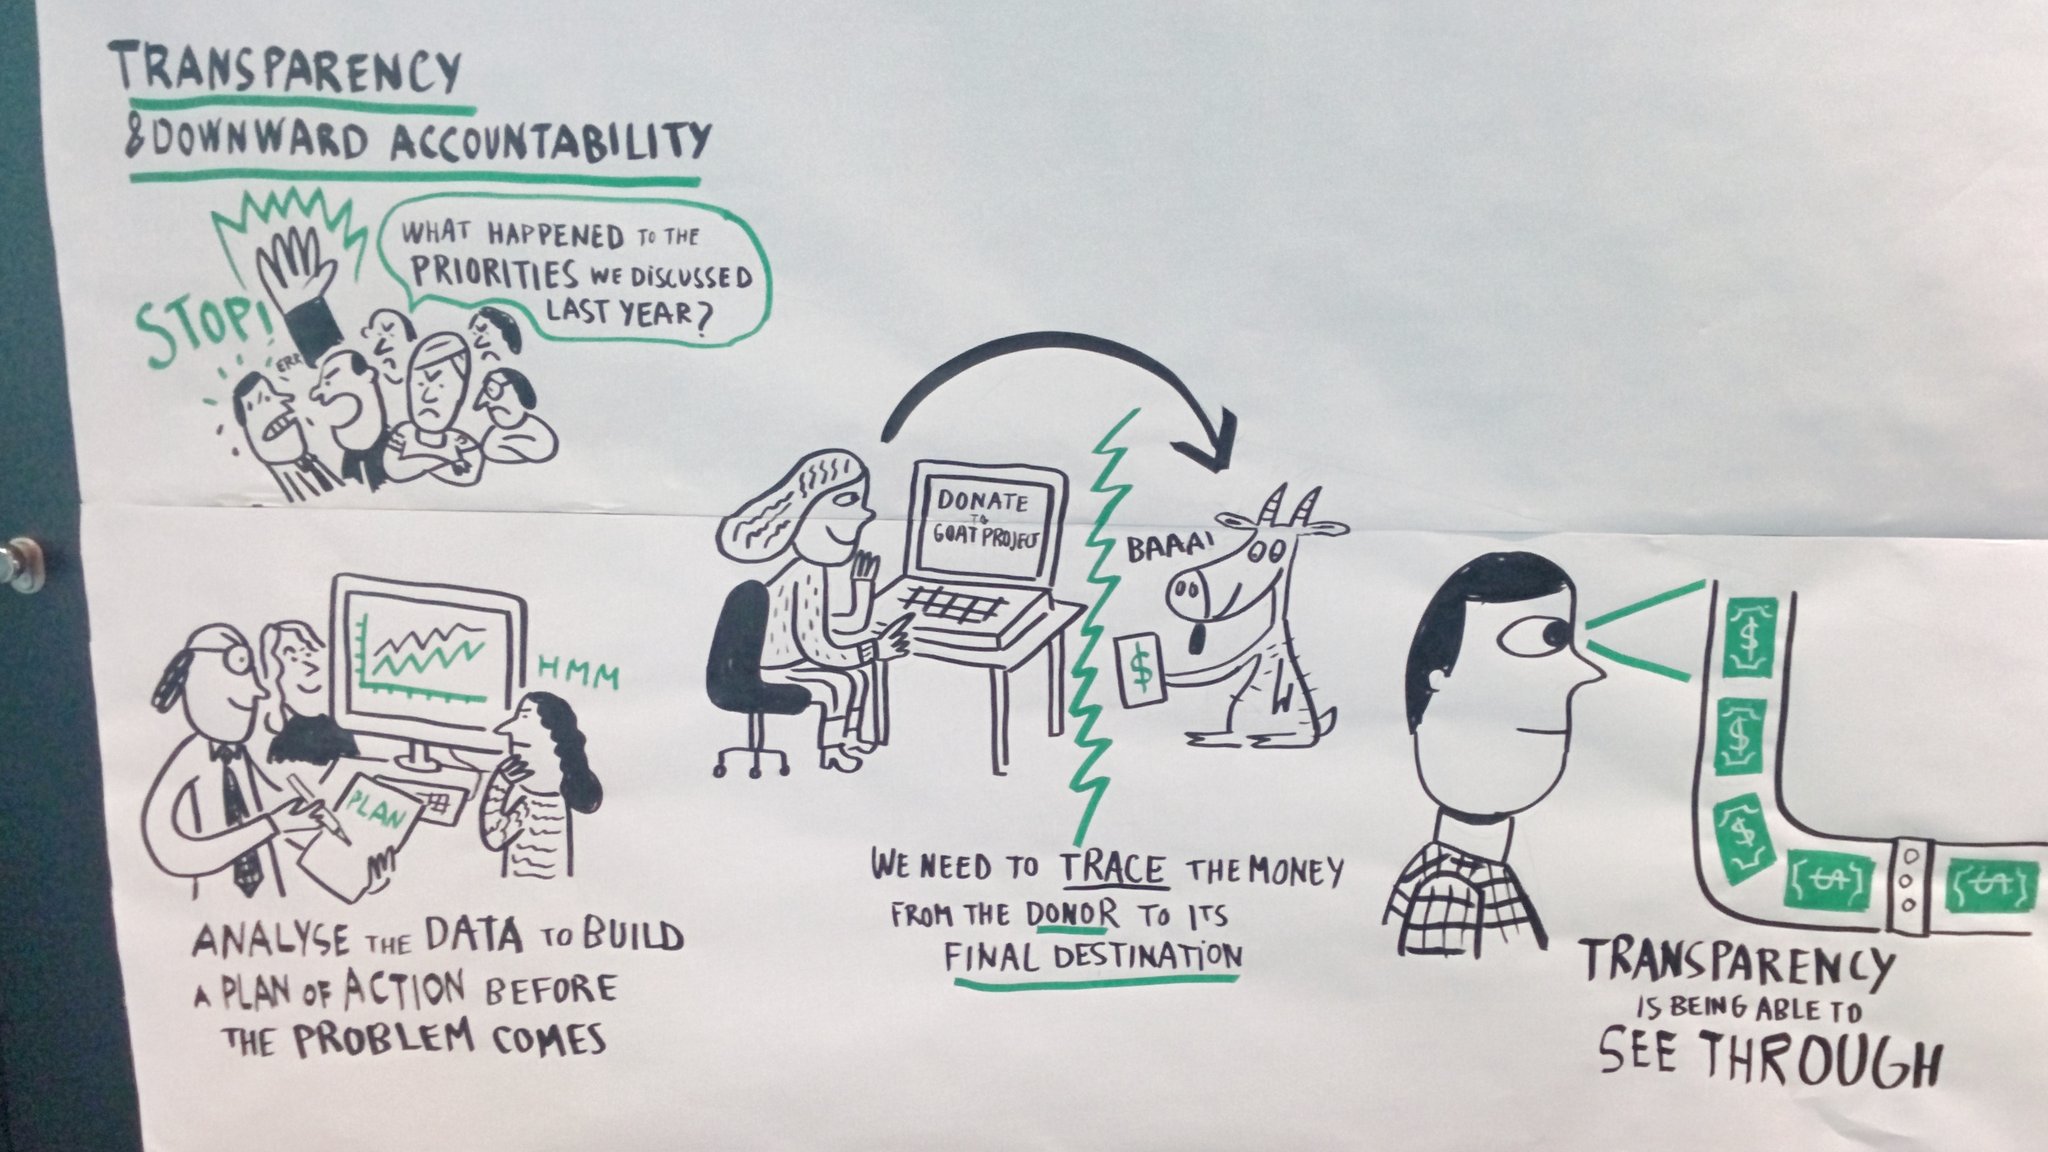 A vivid spotlight on this morning's panel on #transparency and #accountability in #ClimateFinance. Thank you to illustrator Jorge Martin for capturing the discussion at #DCDays17! https://t.co/sAHR231pY7